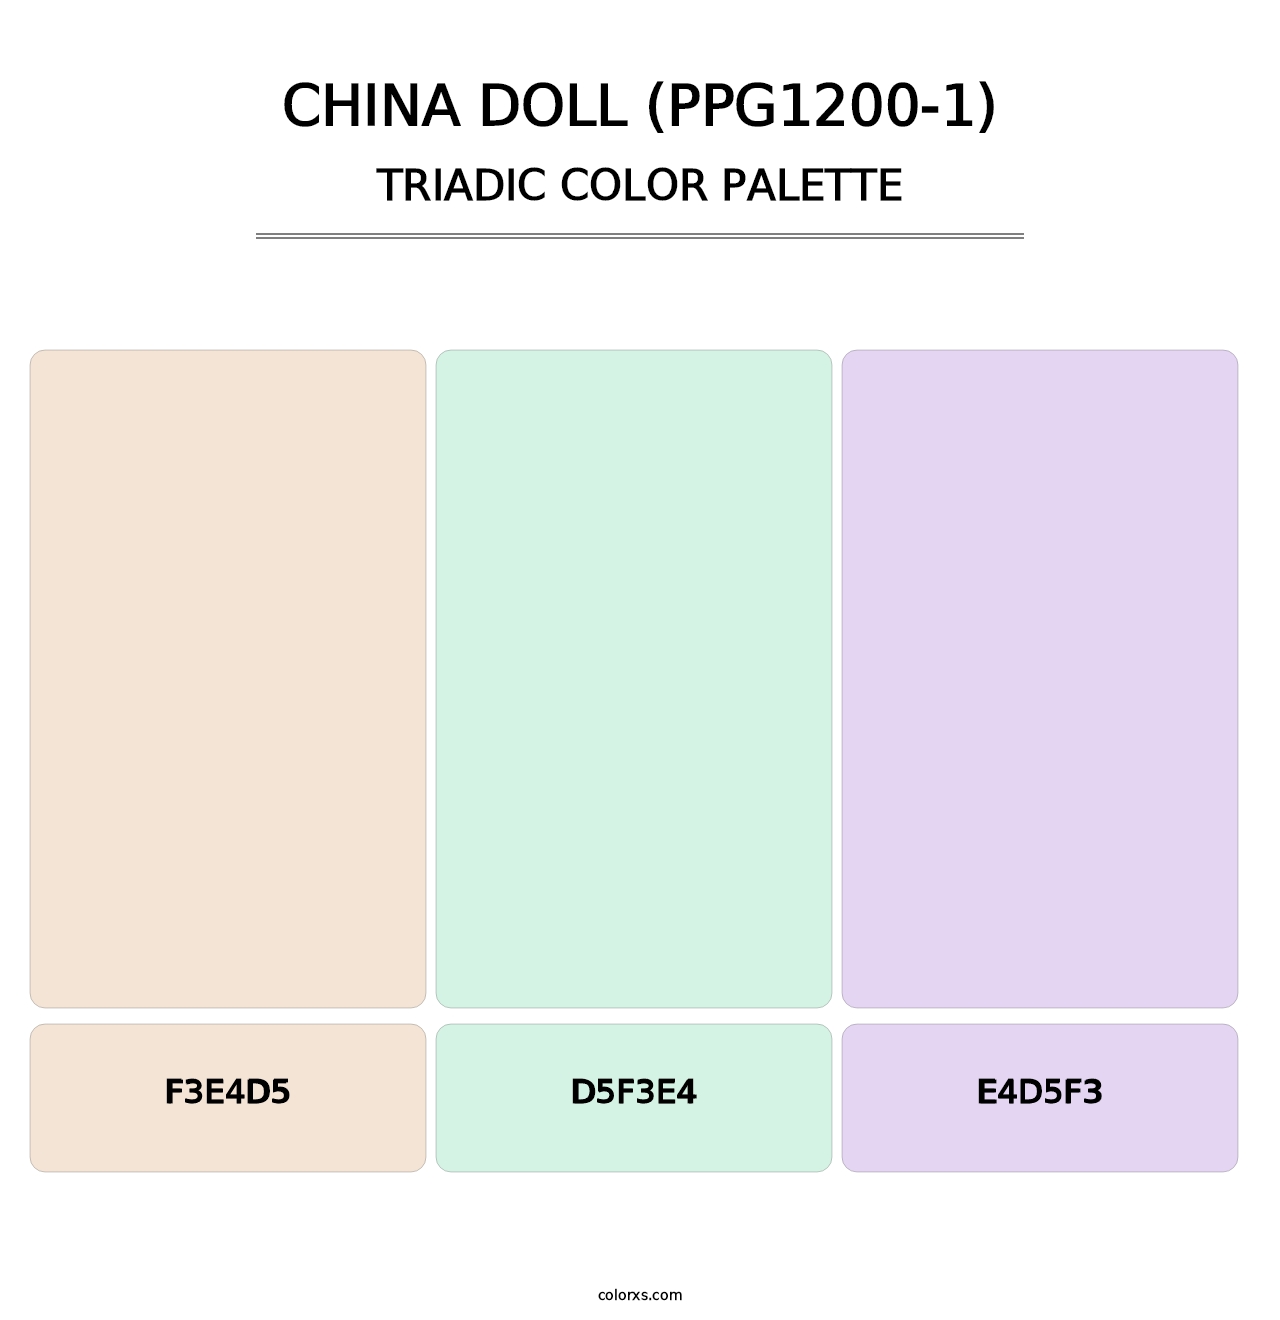 China Doll (PPG1200-1) - Triadic Color Palette